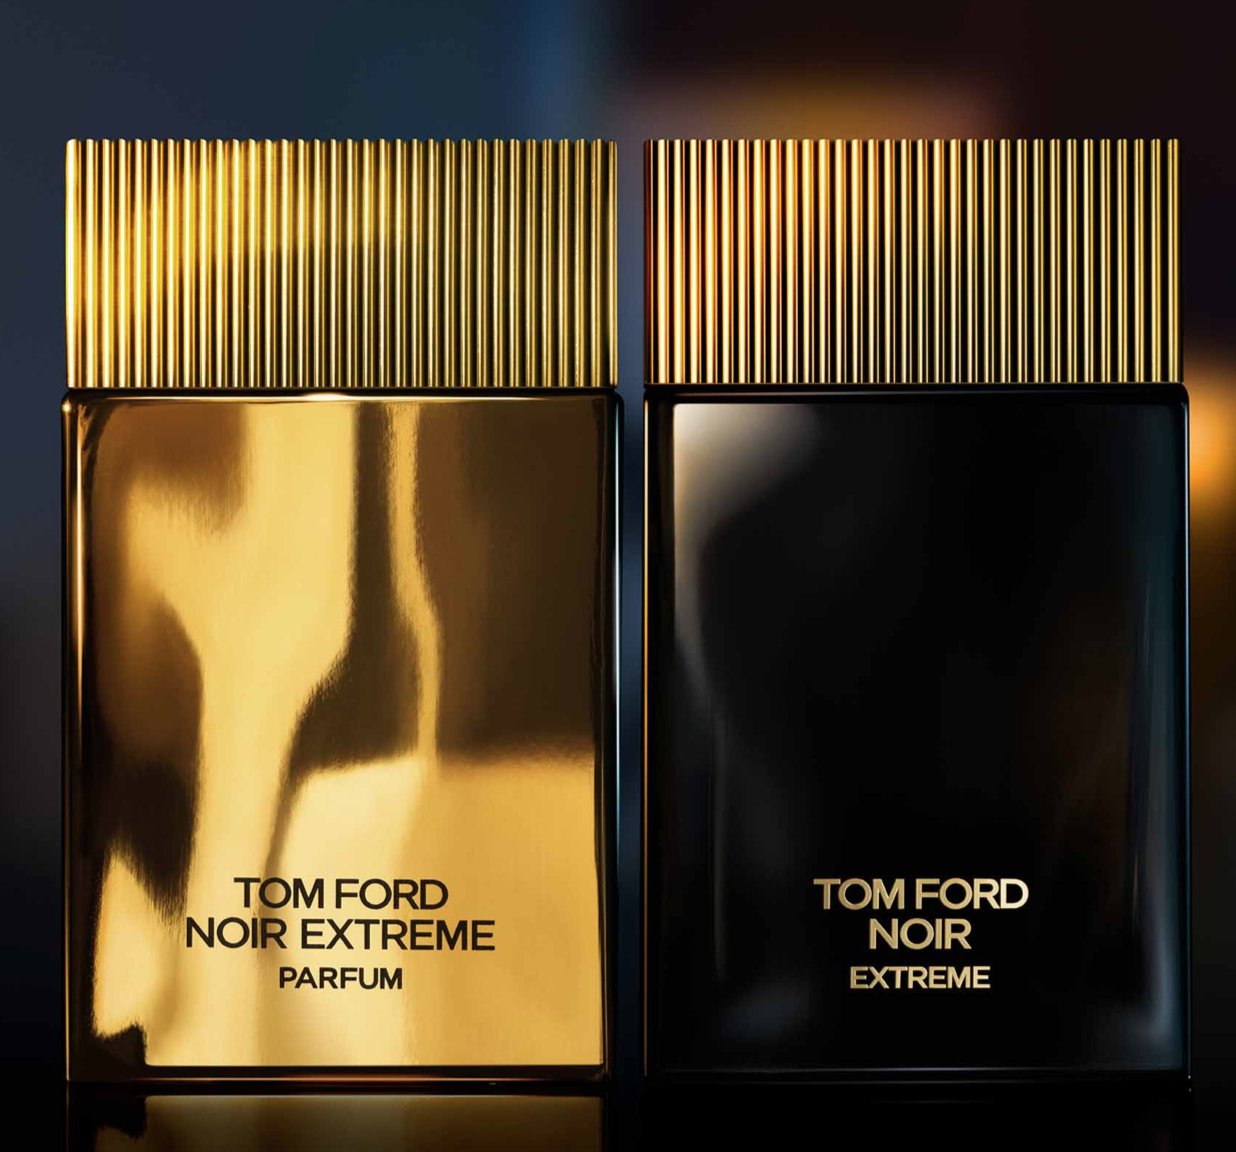 Tom Ford Noir Extreme Parfum: A Story of Ice & Fire ~ Fragrance Reviews